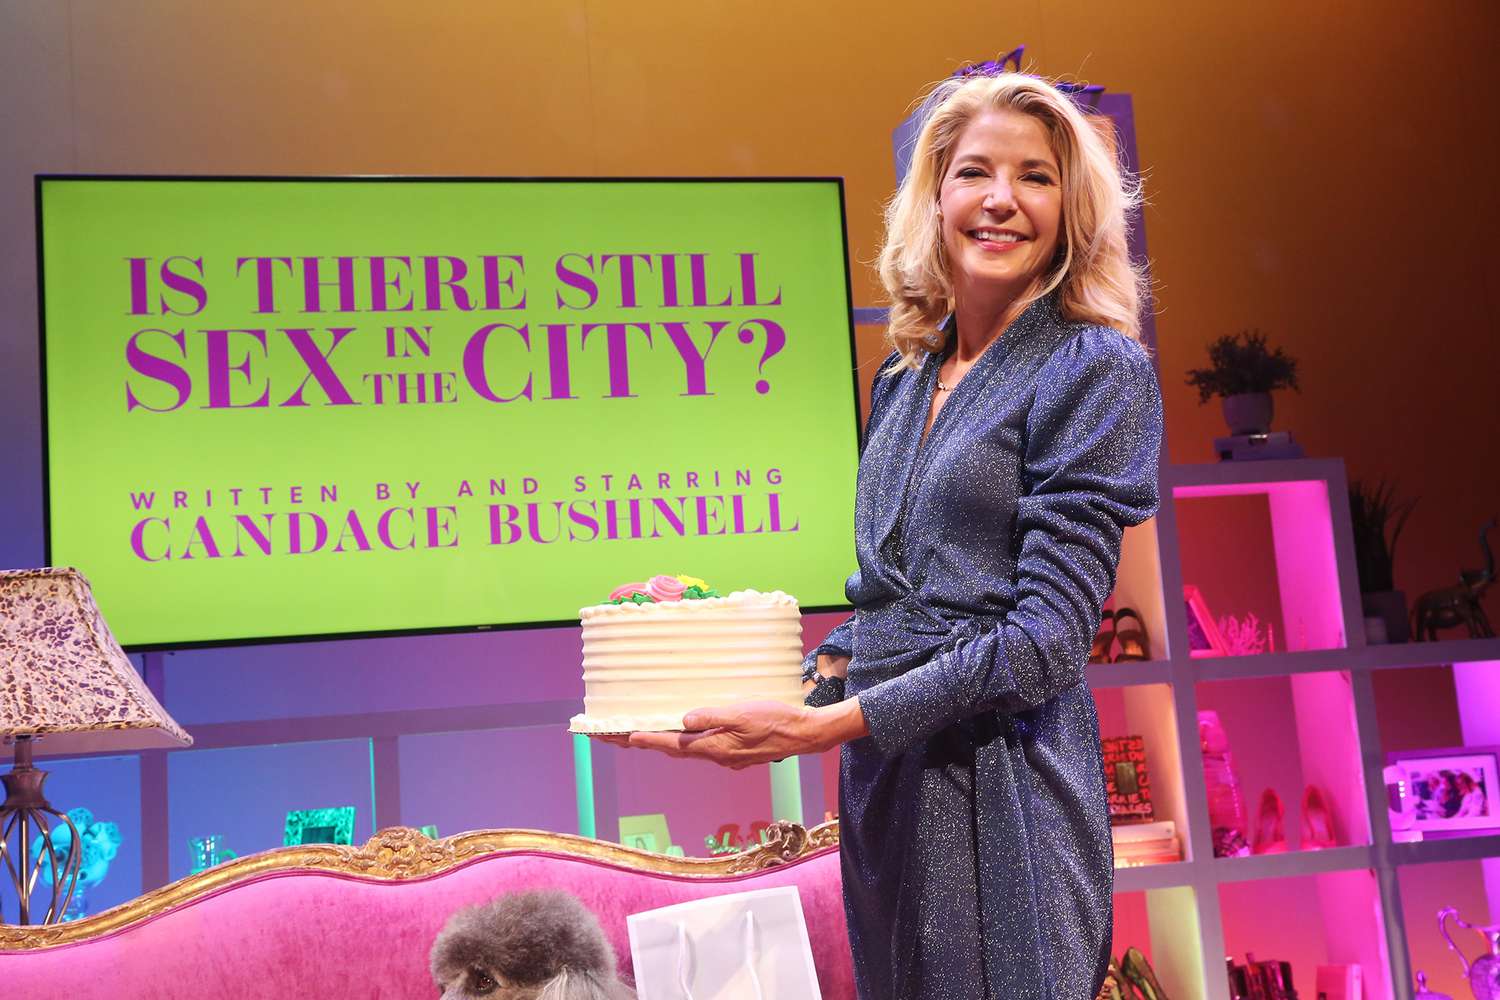 NEW YORK, NEW YORK - DECEMBER 01: Candace Bushnell is surprised on her birthday at her one-woman show “Is There Still Sex in the City?” at The Daryl Roth Theatre on December 1, 2021 in New York City. (Photo by Bruce Glikas/Getty Images)